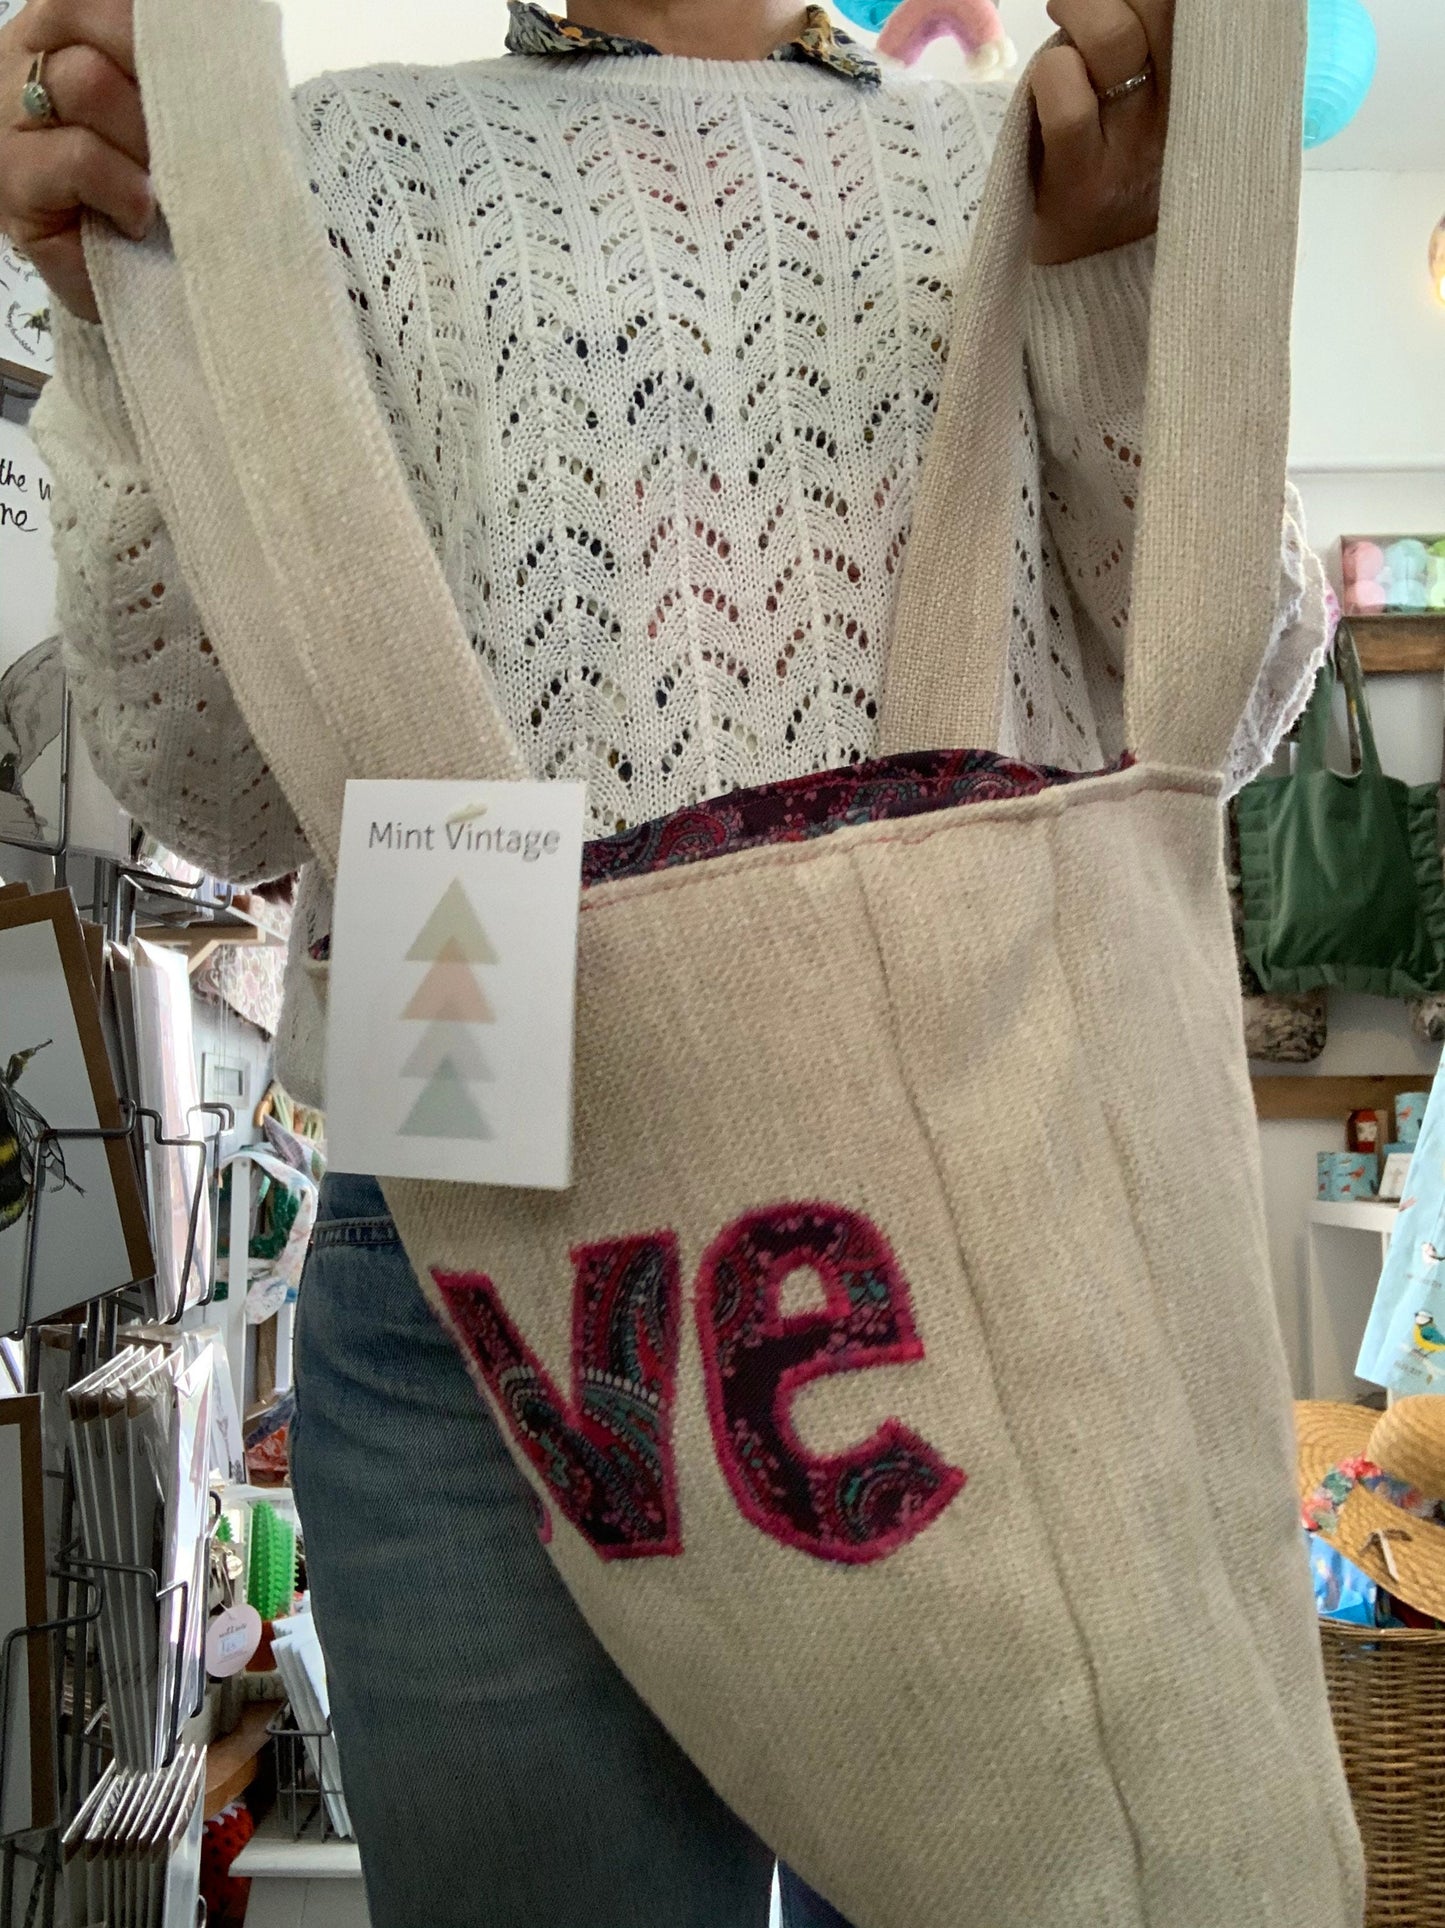 Handmade appliqué LOVE tote bag made from repurposed vintage textiles